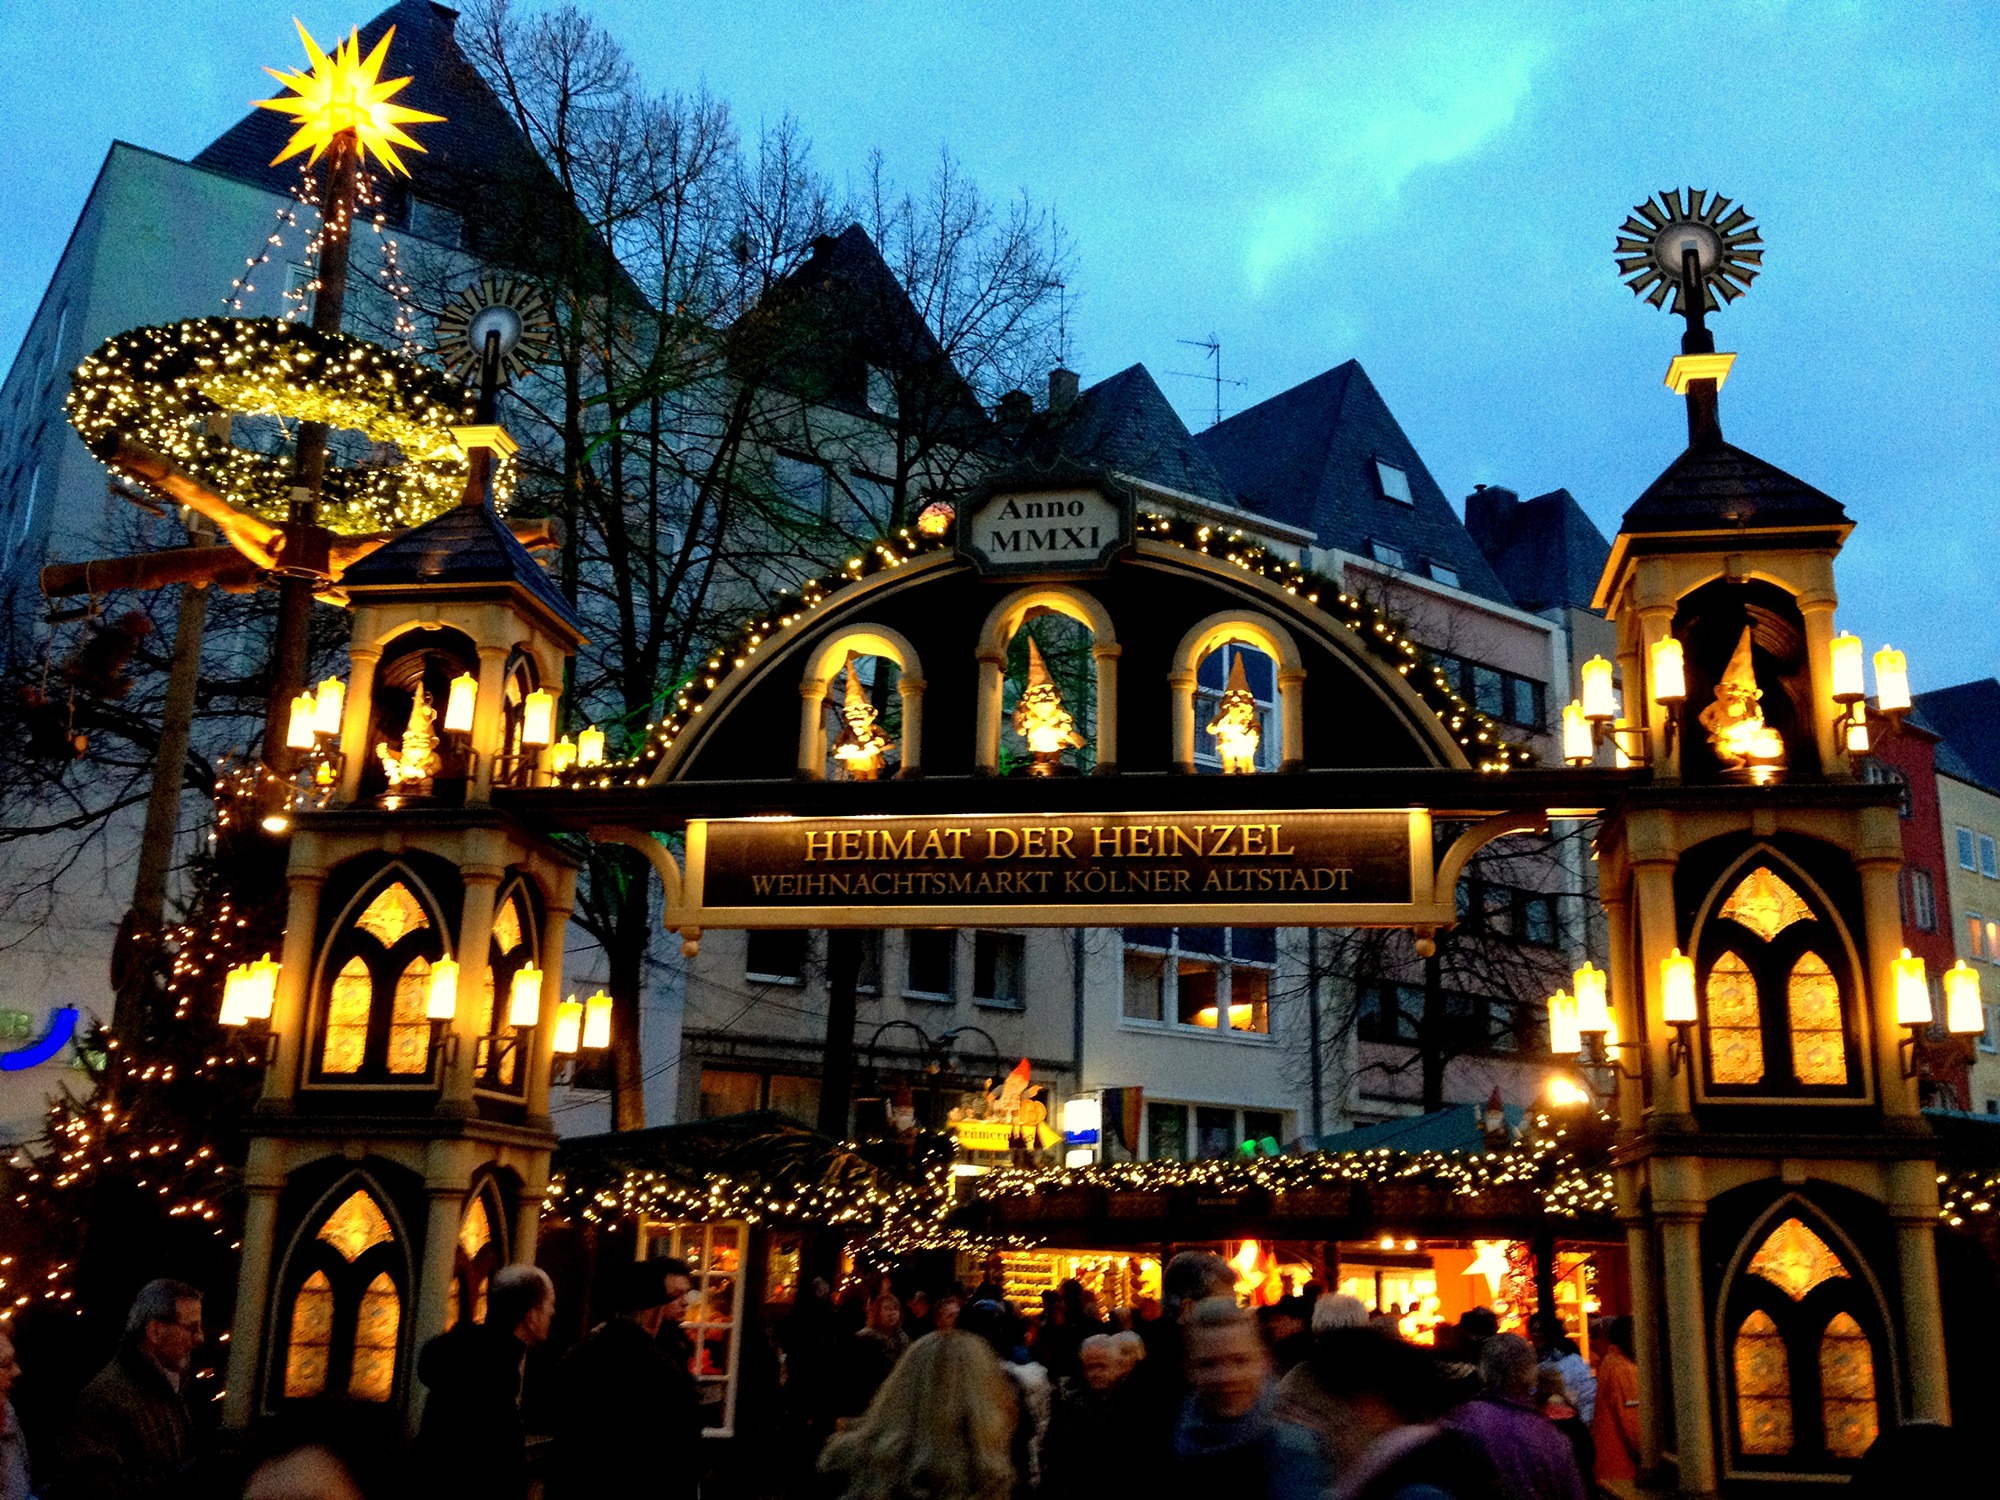 10 Best Christmas Markets In Germany - German Cities To